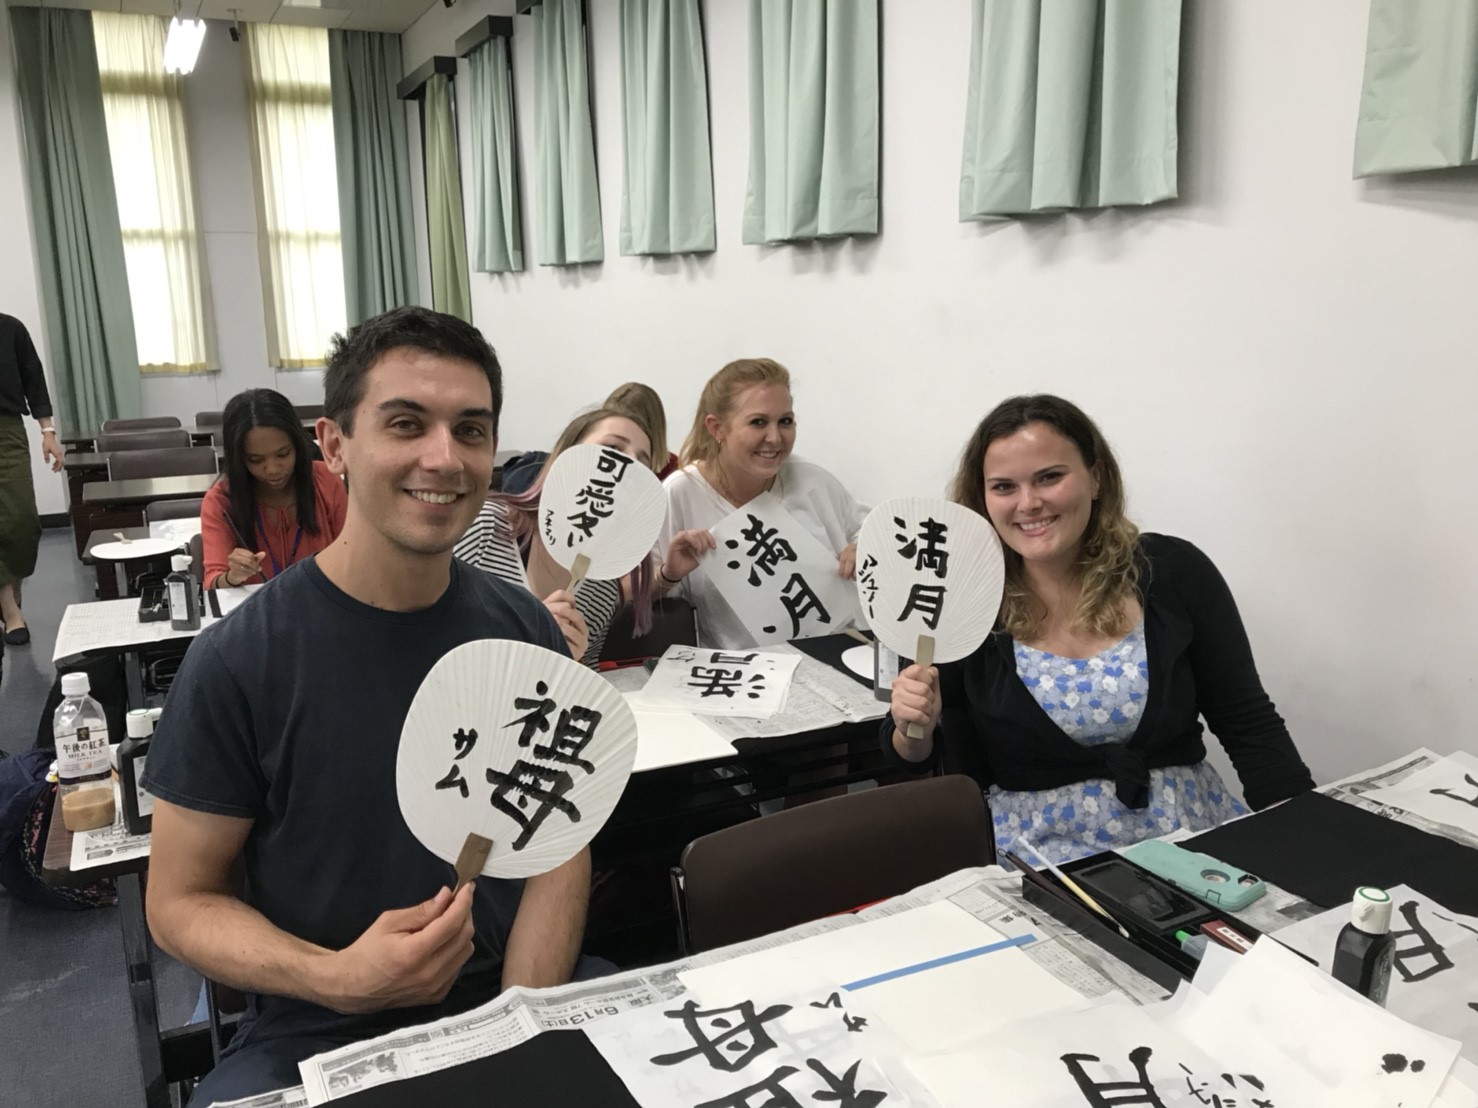 Students in a Japanese language class